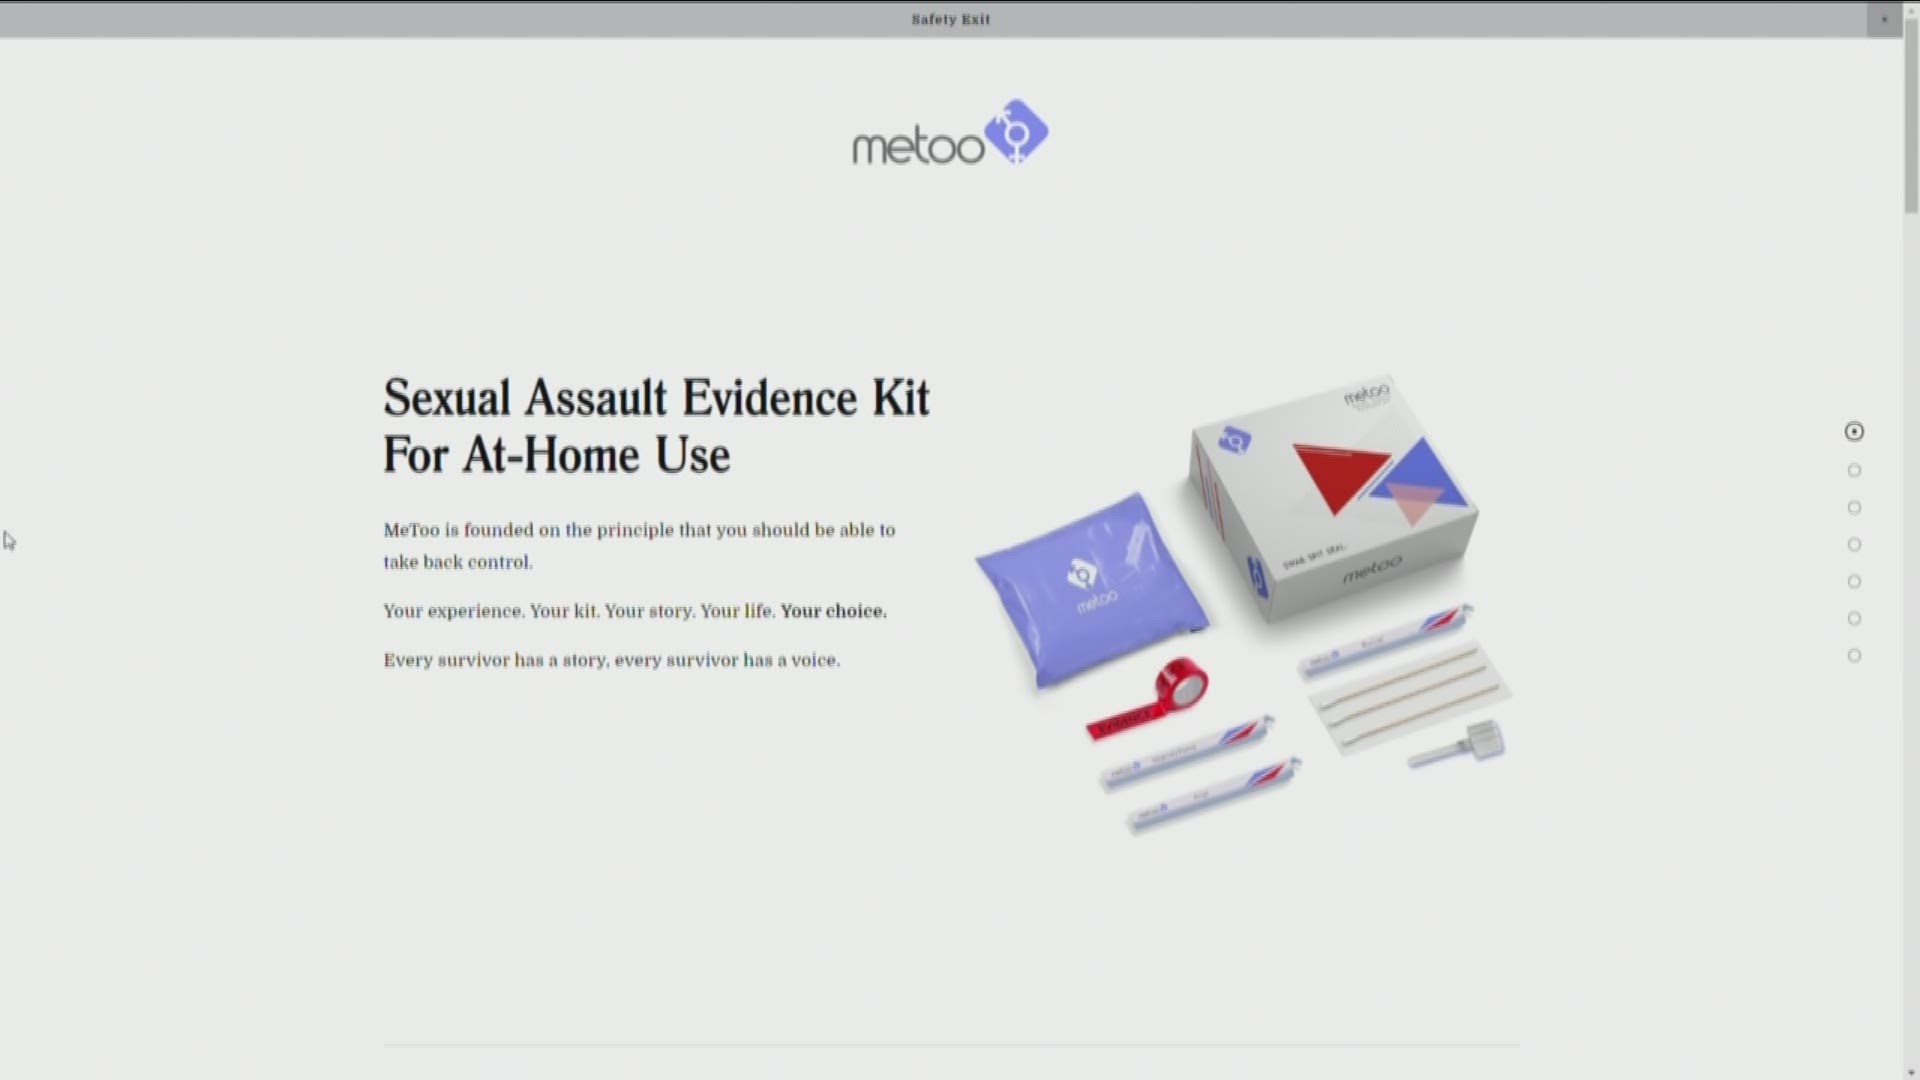 The MeToo Kit is popping up on store shelves. The kit claims to give victims of sexual violence the tools to collect evidence at home, but Attorney General Mark Herring said the kits could prevent or delay survivors from connecting with important healthcare resources.